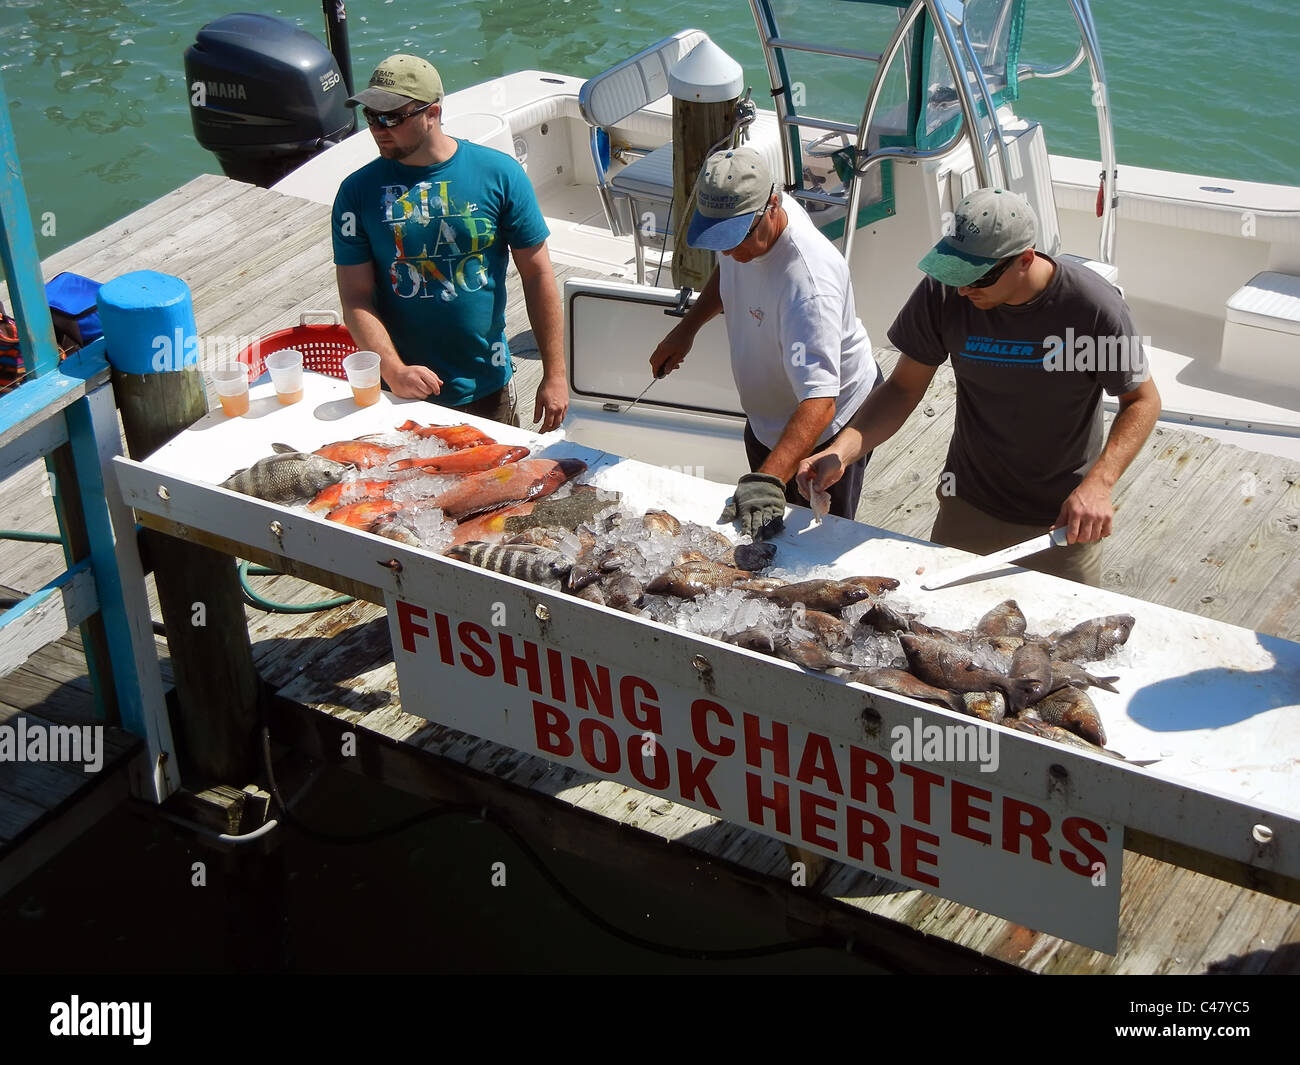 Fishermen clean fish at a table after returning from a charter fishiing trip at John's Pass Florida near St. Pete Beach Stock Photo